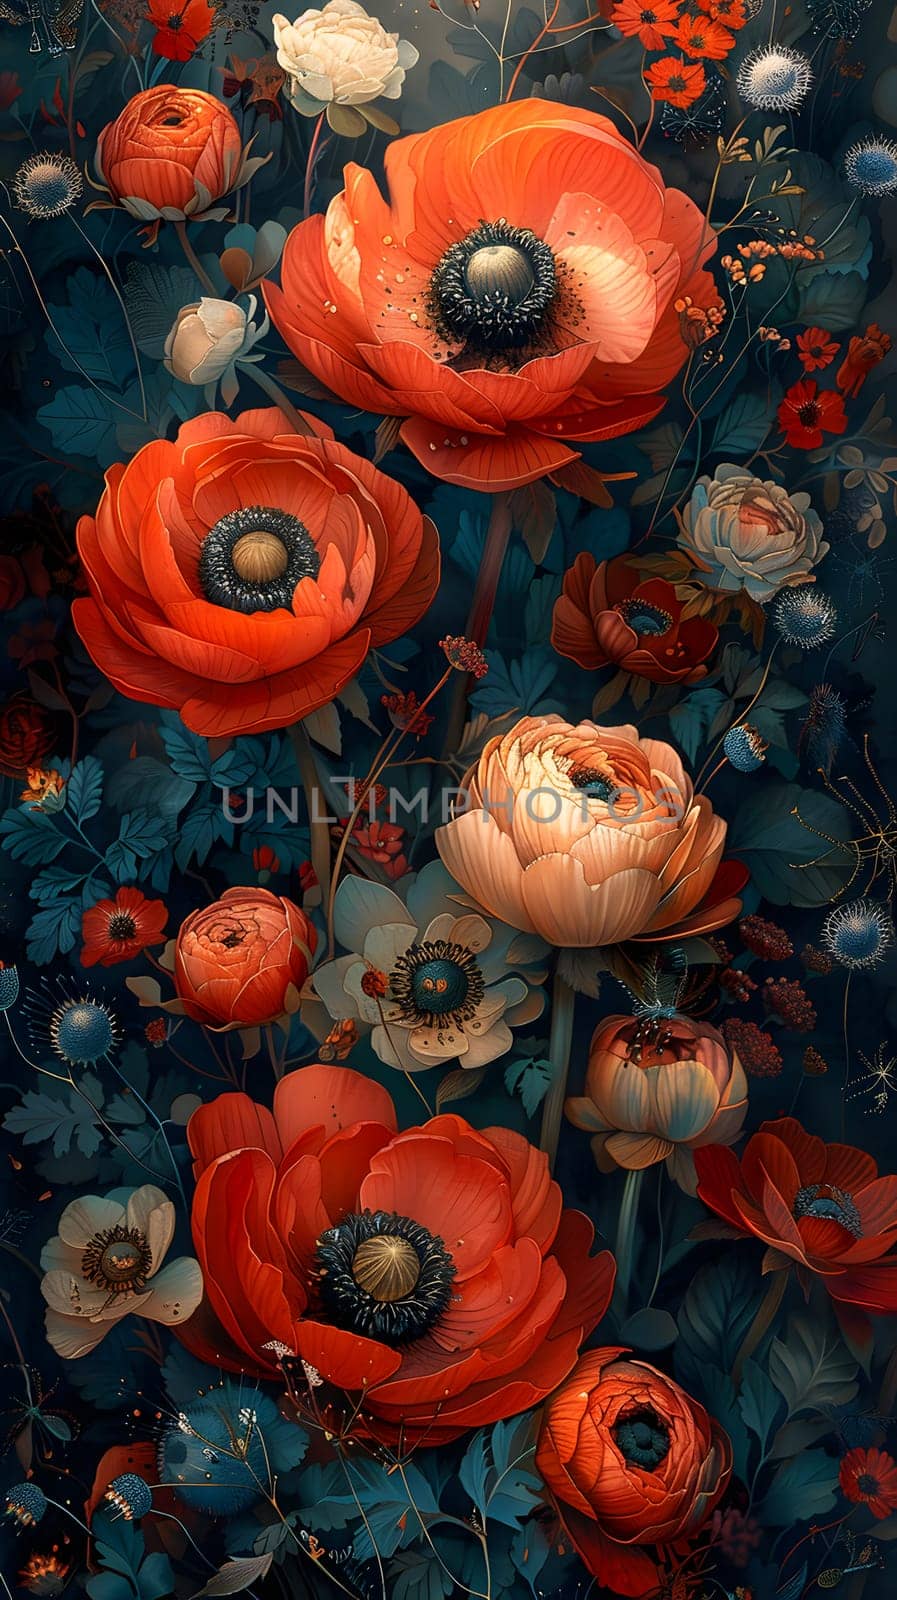 A beautiful painting depicting red and white flowers set against a dark background, showcasing the vibrant colors of nature in contrast with the azure backdrop